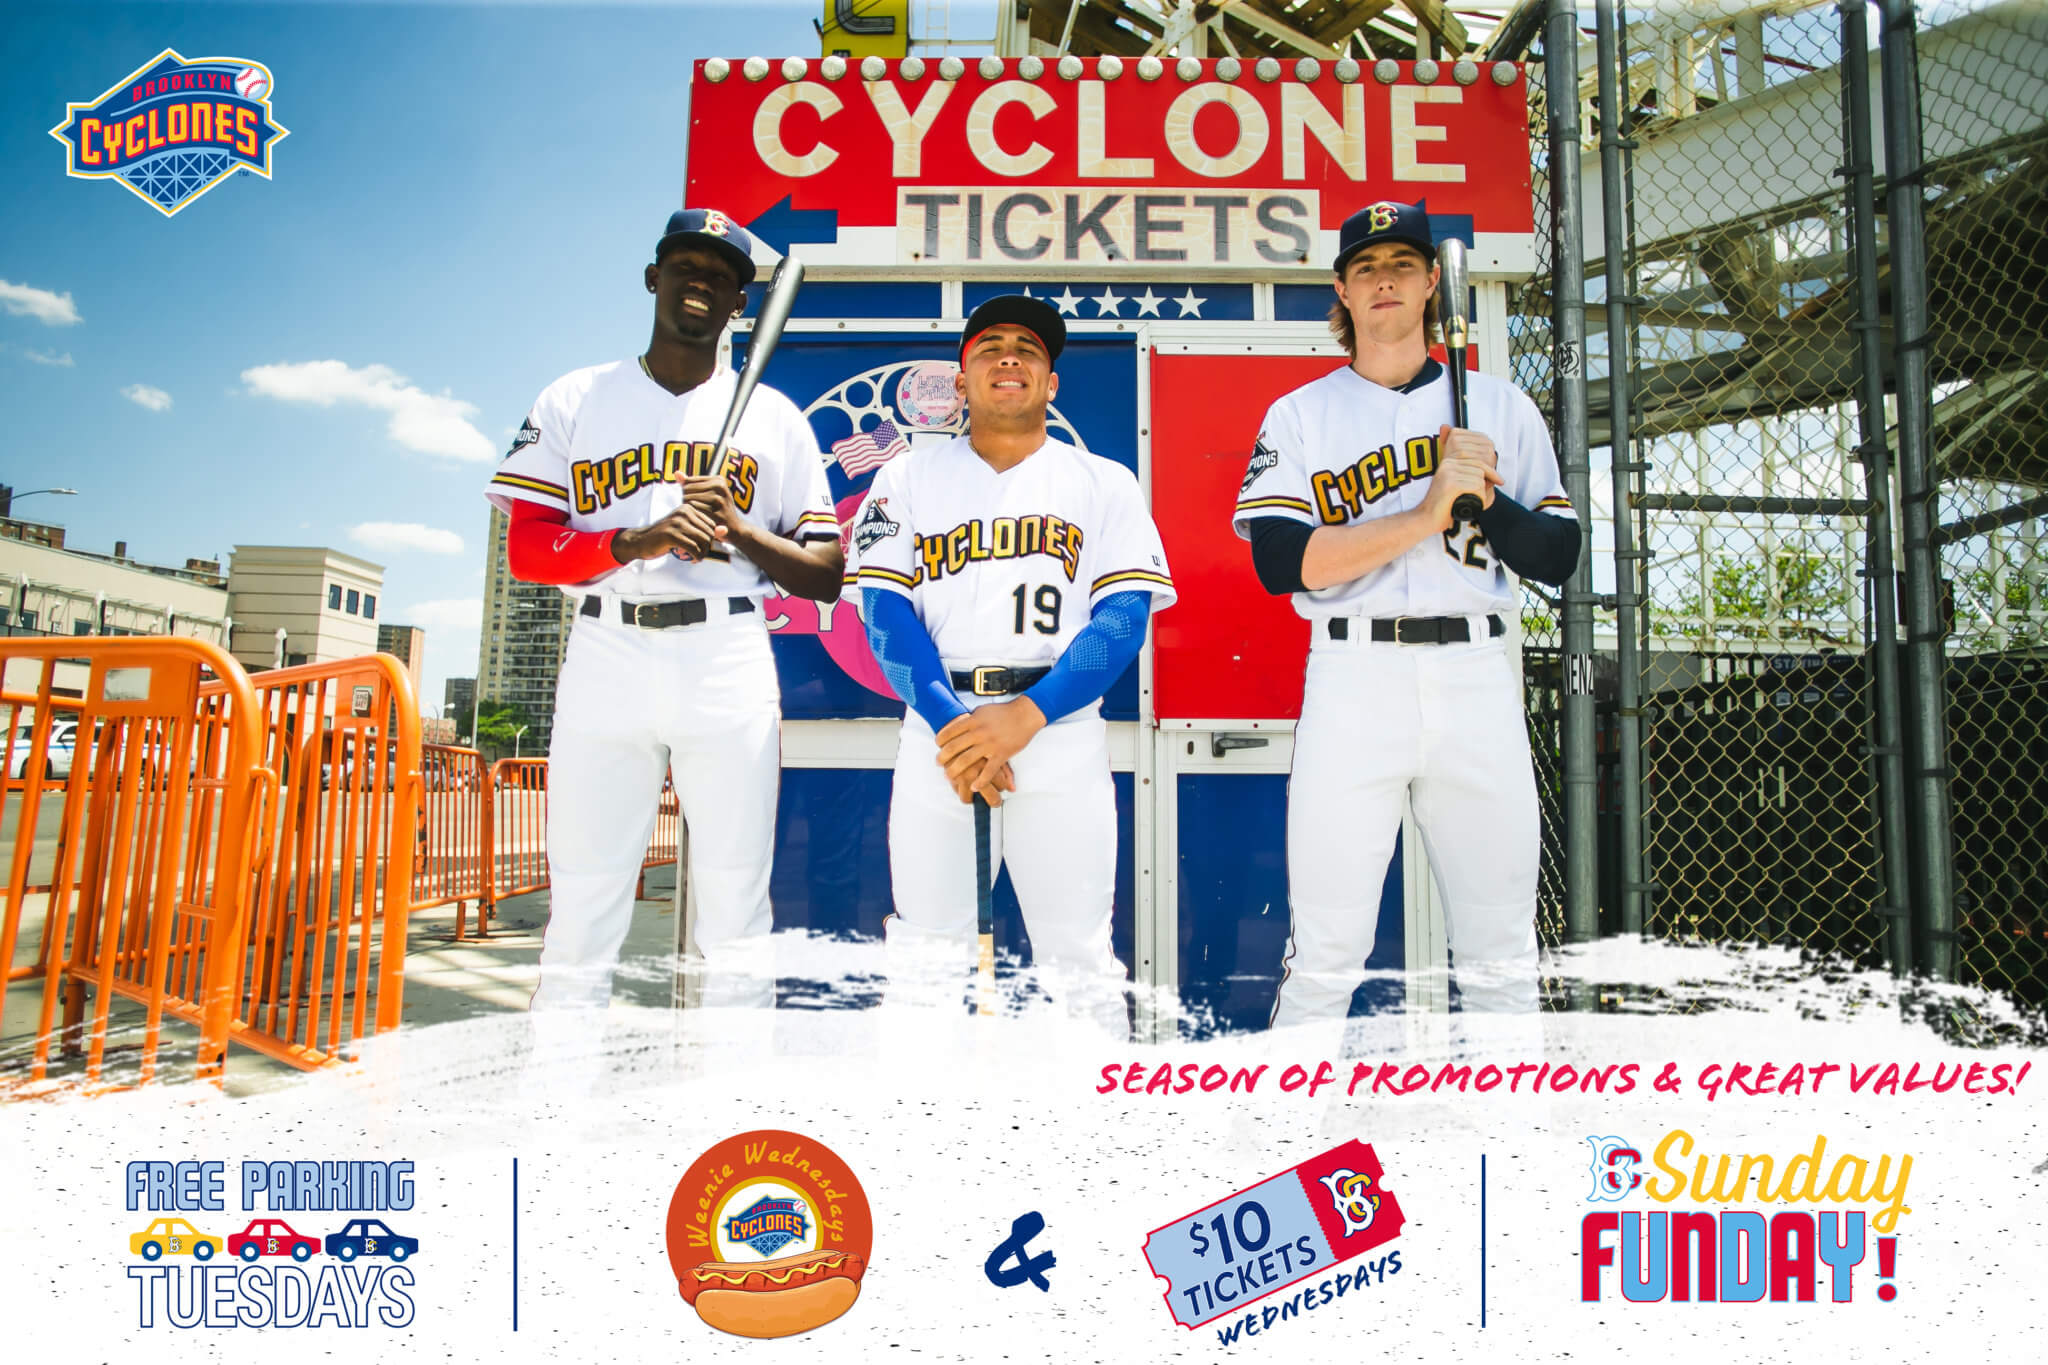 Brooklyn Cyclones say ‘play ball’ with fun and familyfriendly